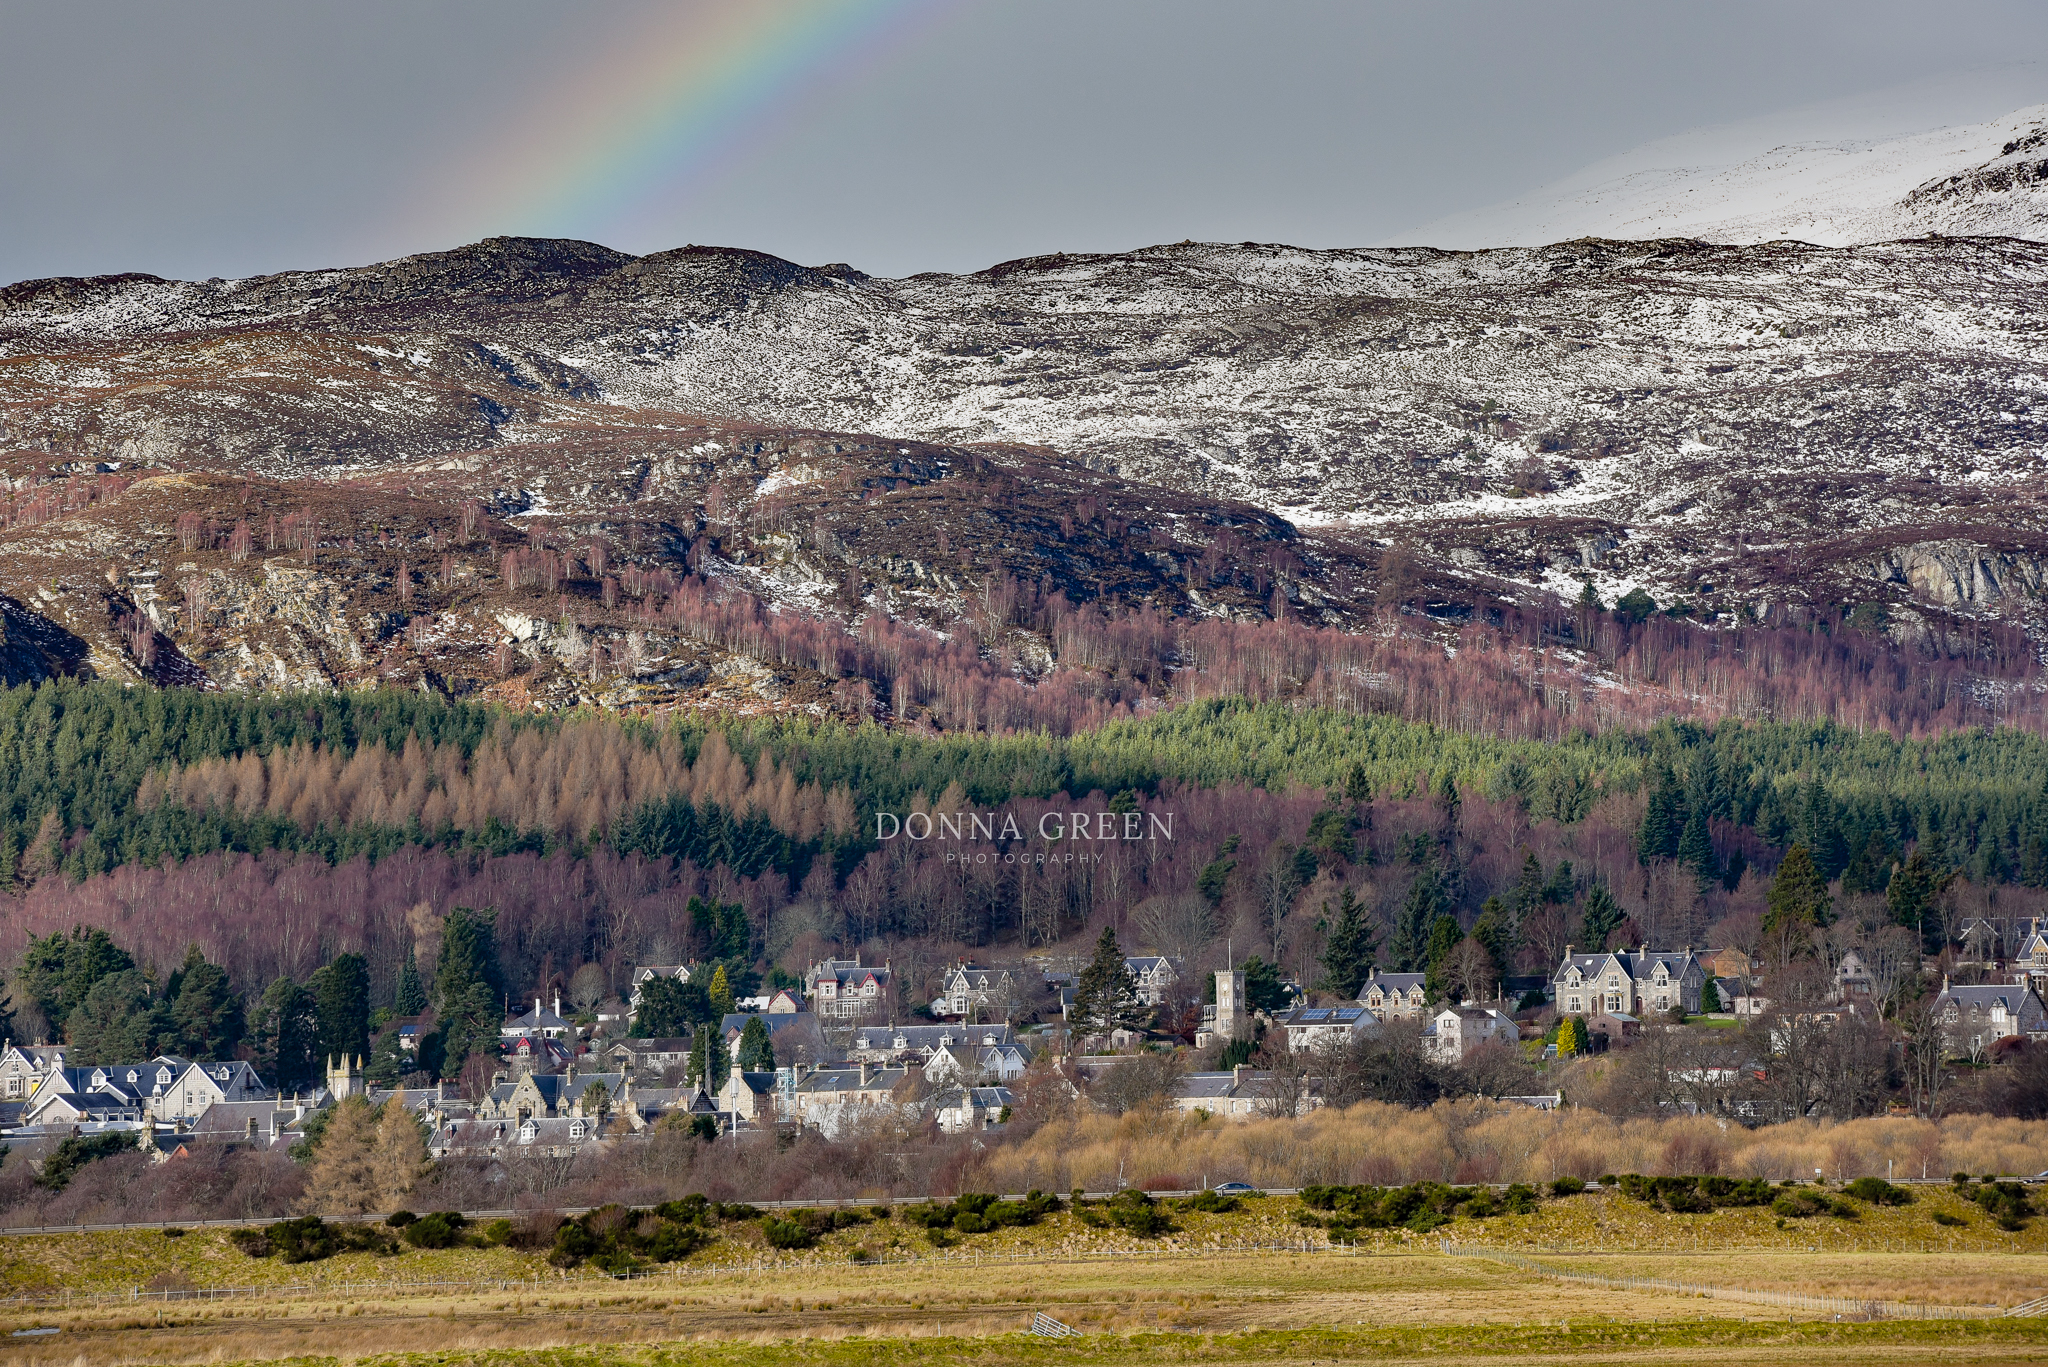 Rainbow over Kingussie, Inverness-shire, Highlands of Scotland